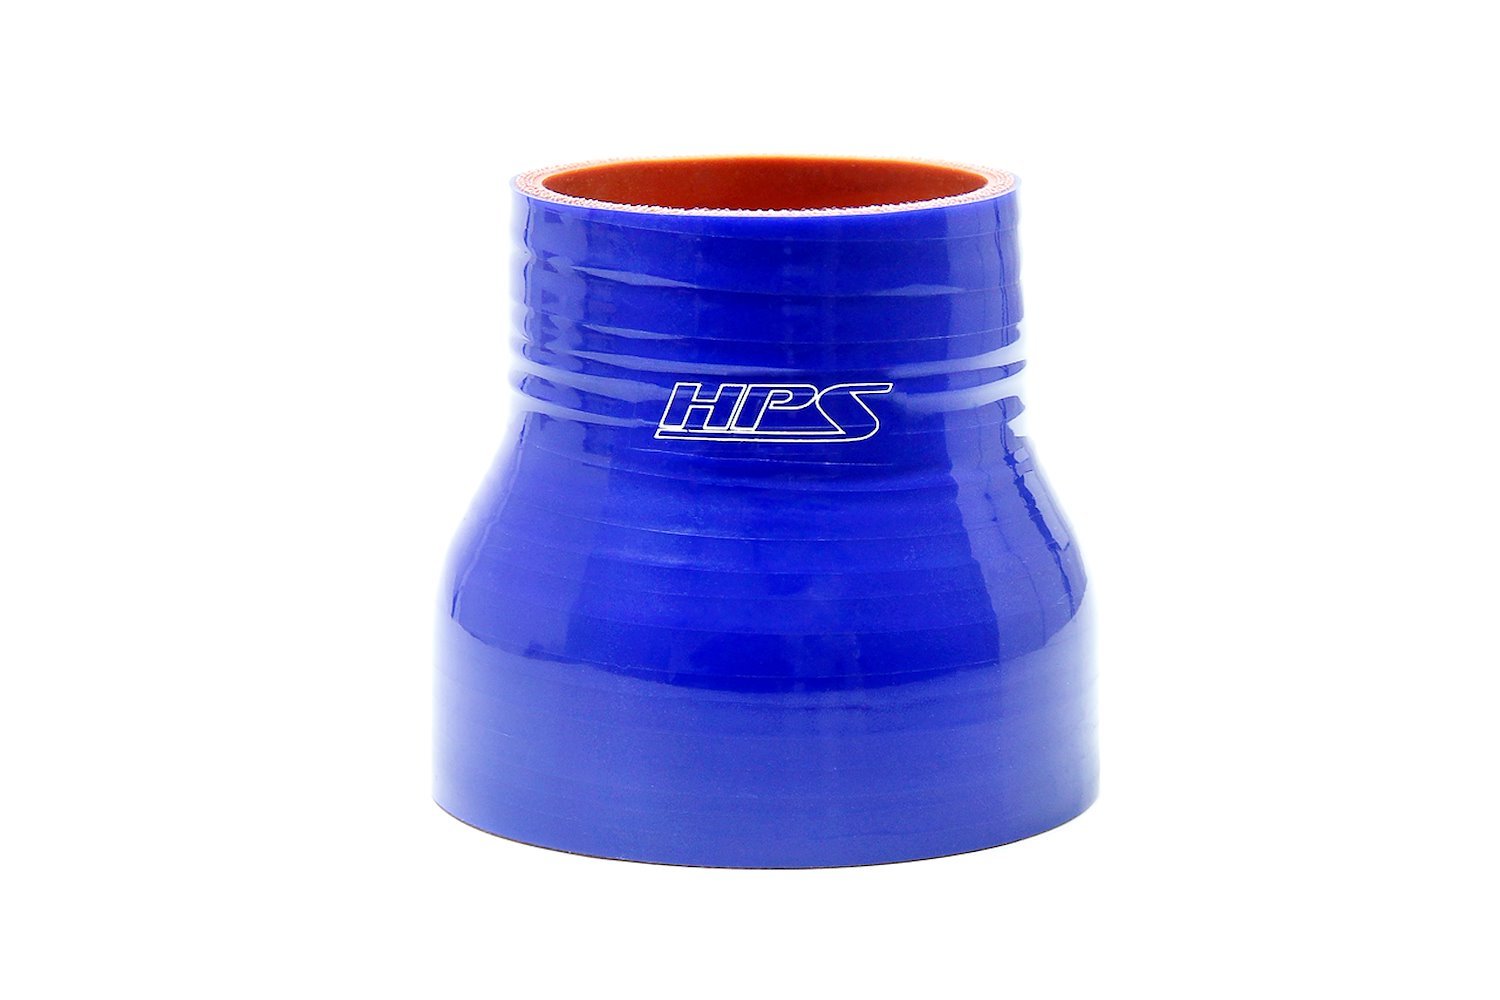 HTSR-200-312-BLUE Silicone Reducer Hose, High-Temp 4-Ply Reinforced, 2 in. - 3-1/8 in. ID, 3 in. Long, Blue